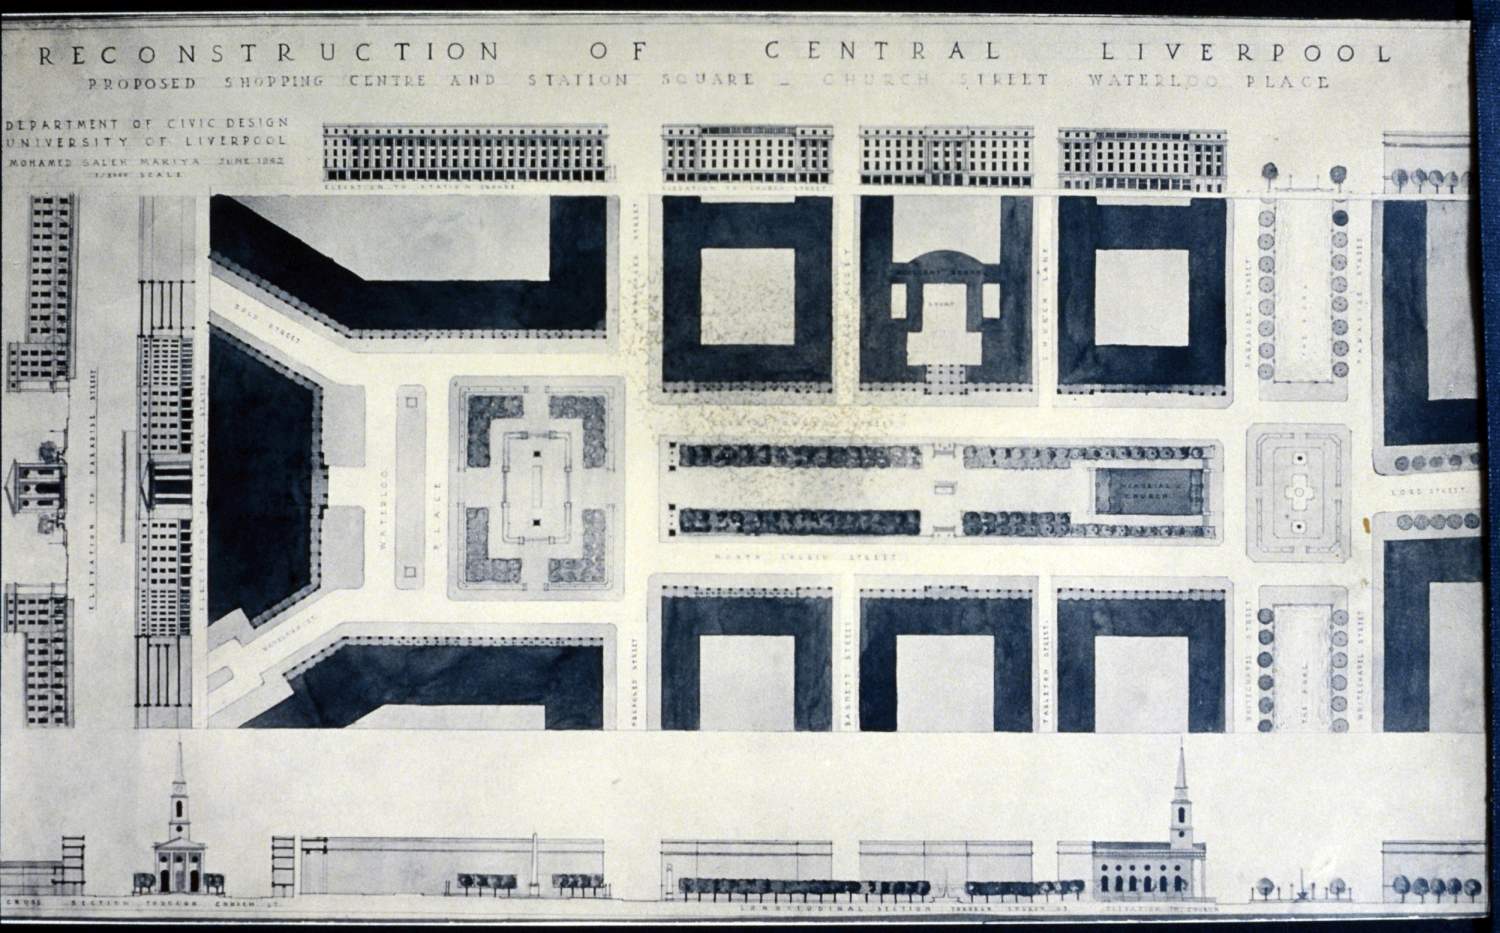 Mohamed Makiya - <p>View of a proposal for the reconstruction of central Liverpool</p>